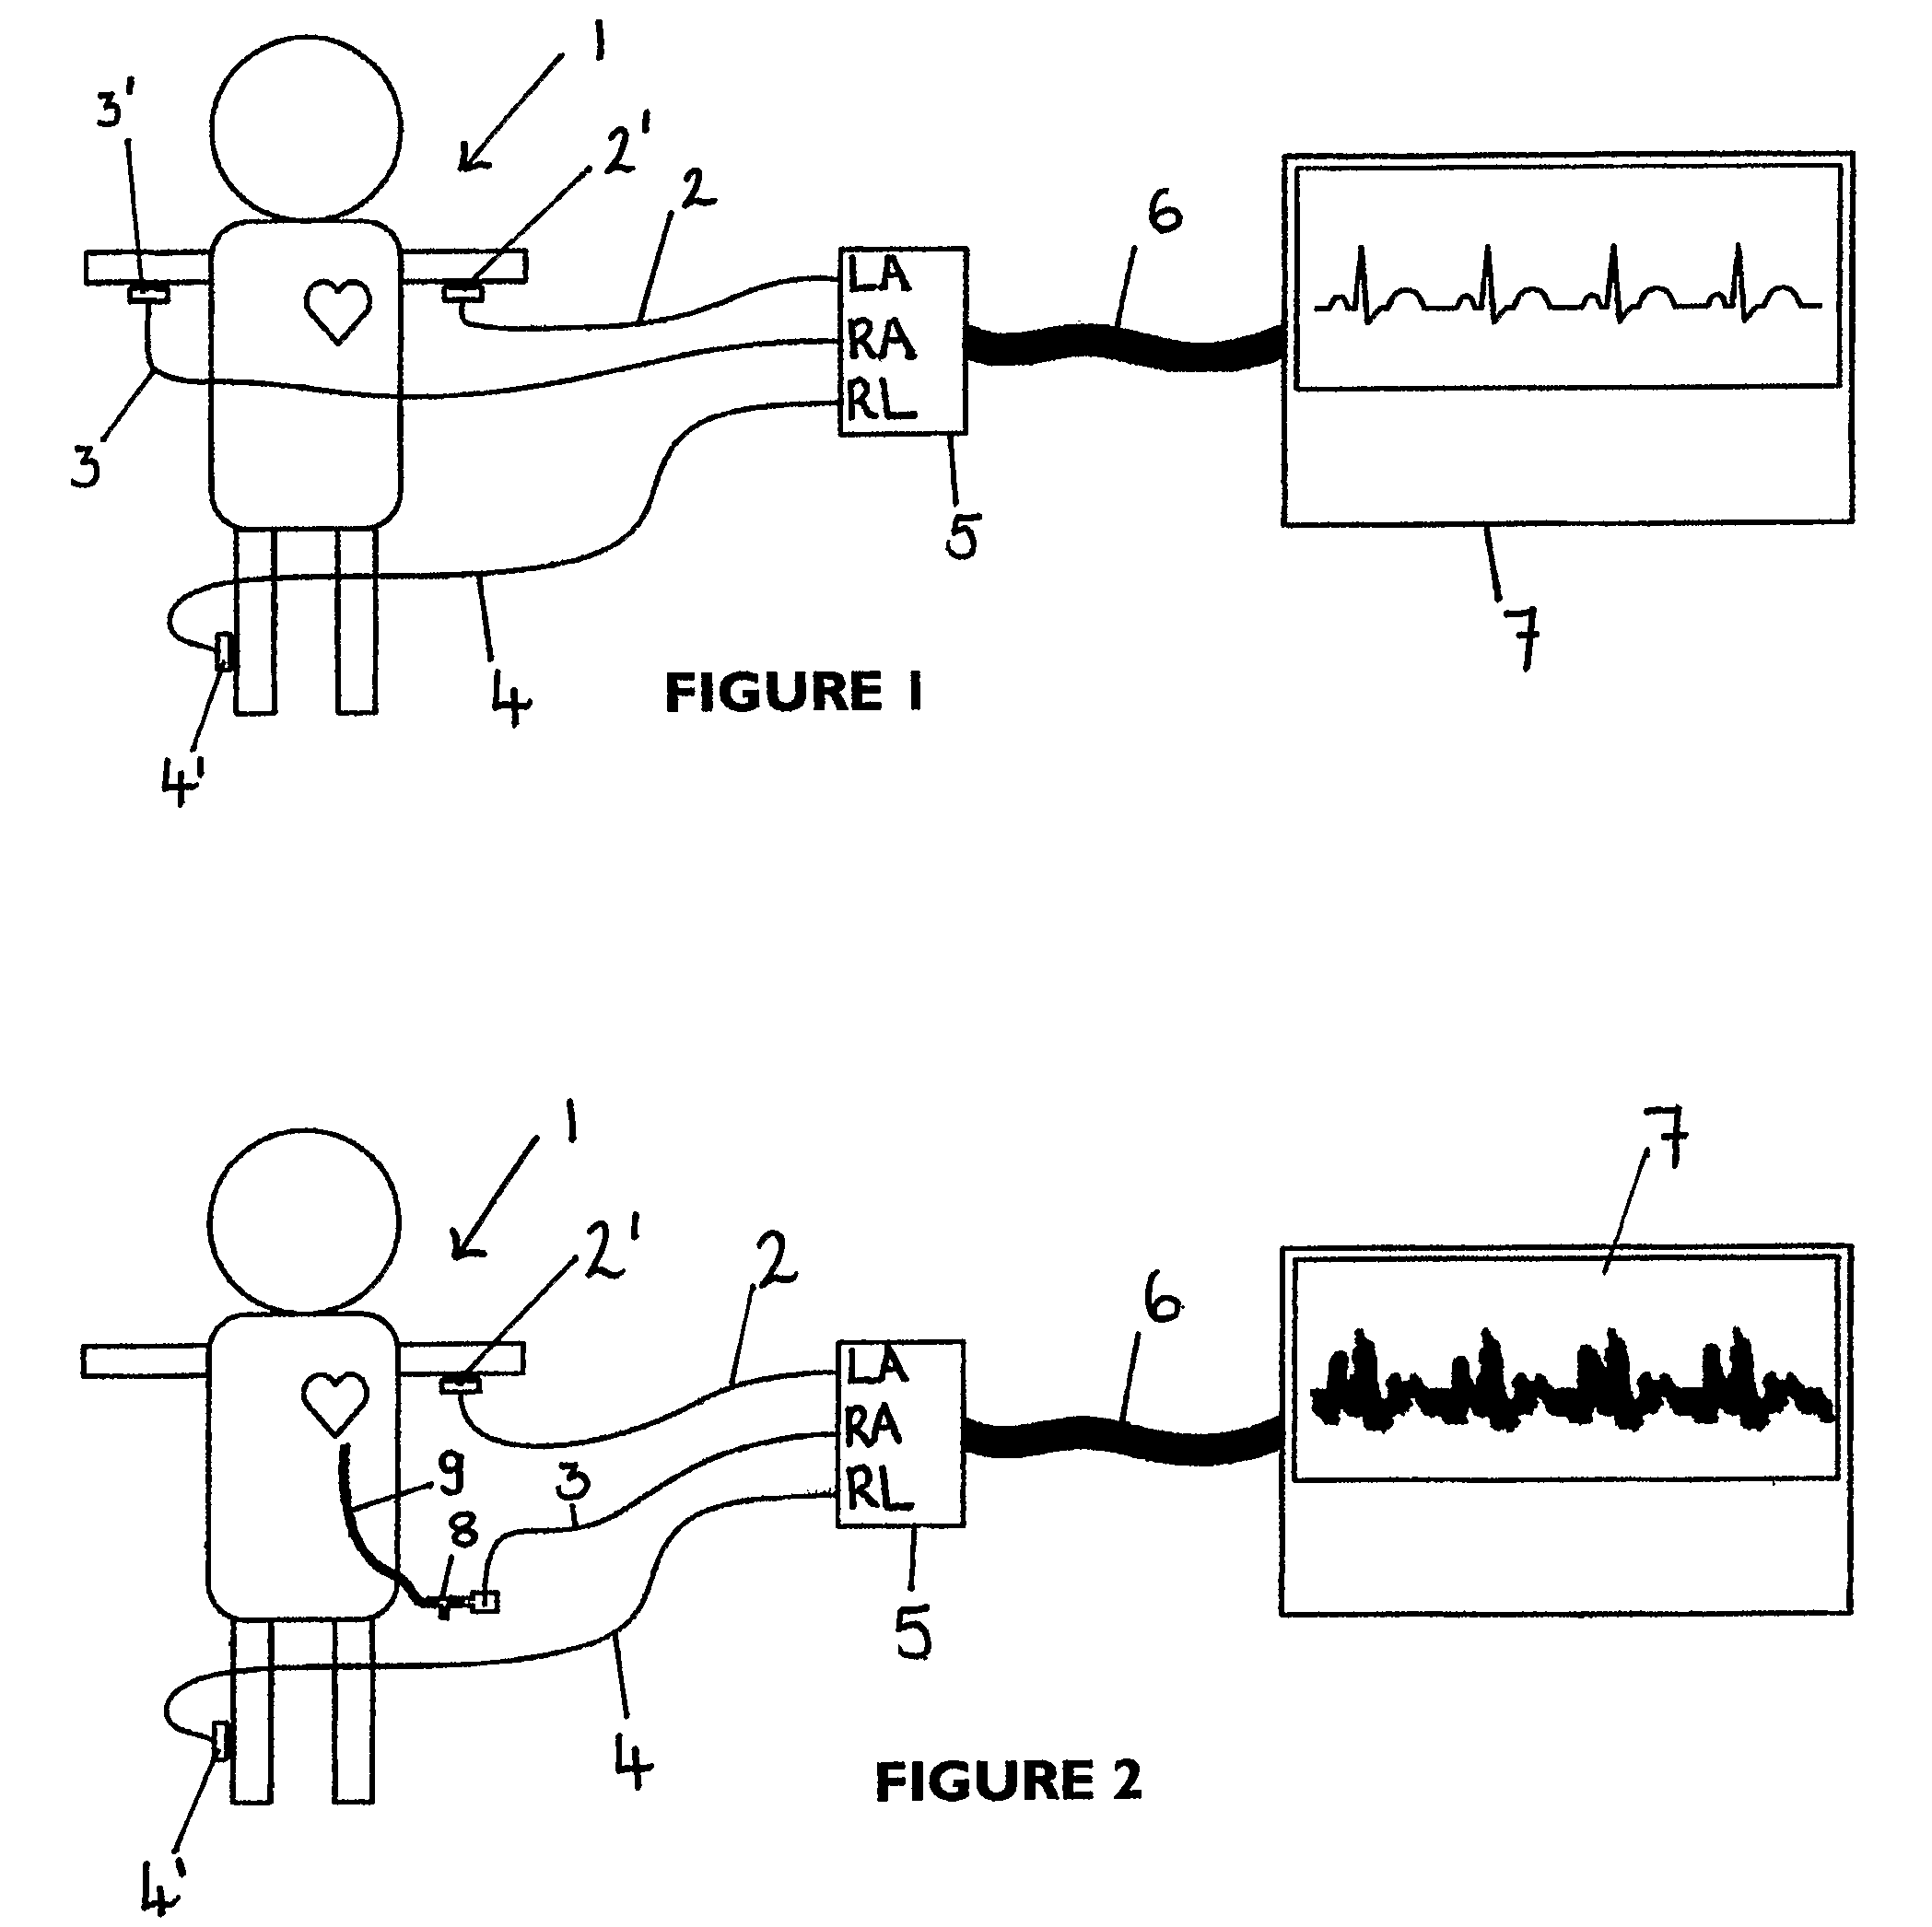 Apparatus for detecting the position of a percutaneously-inserted intravenous catheter